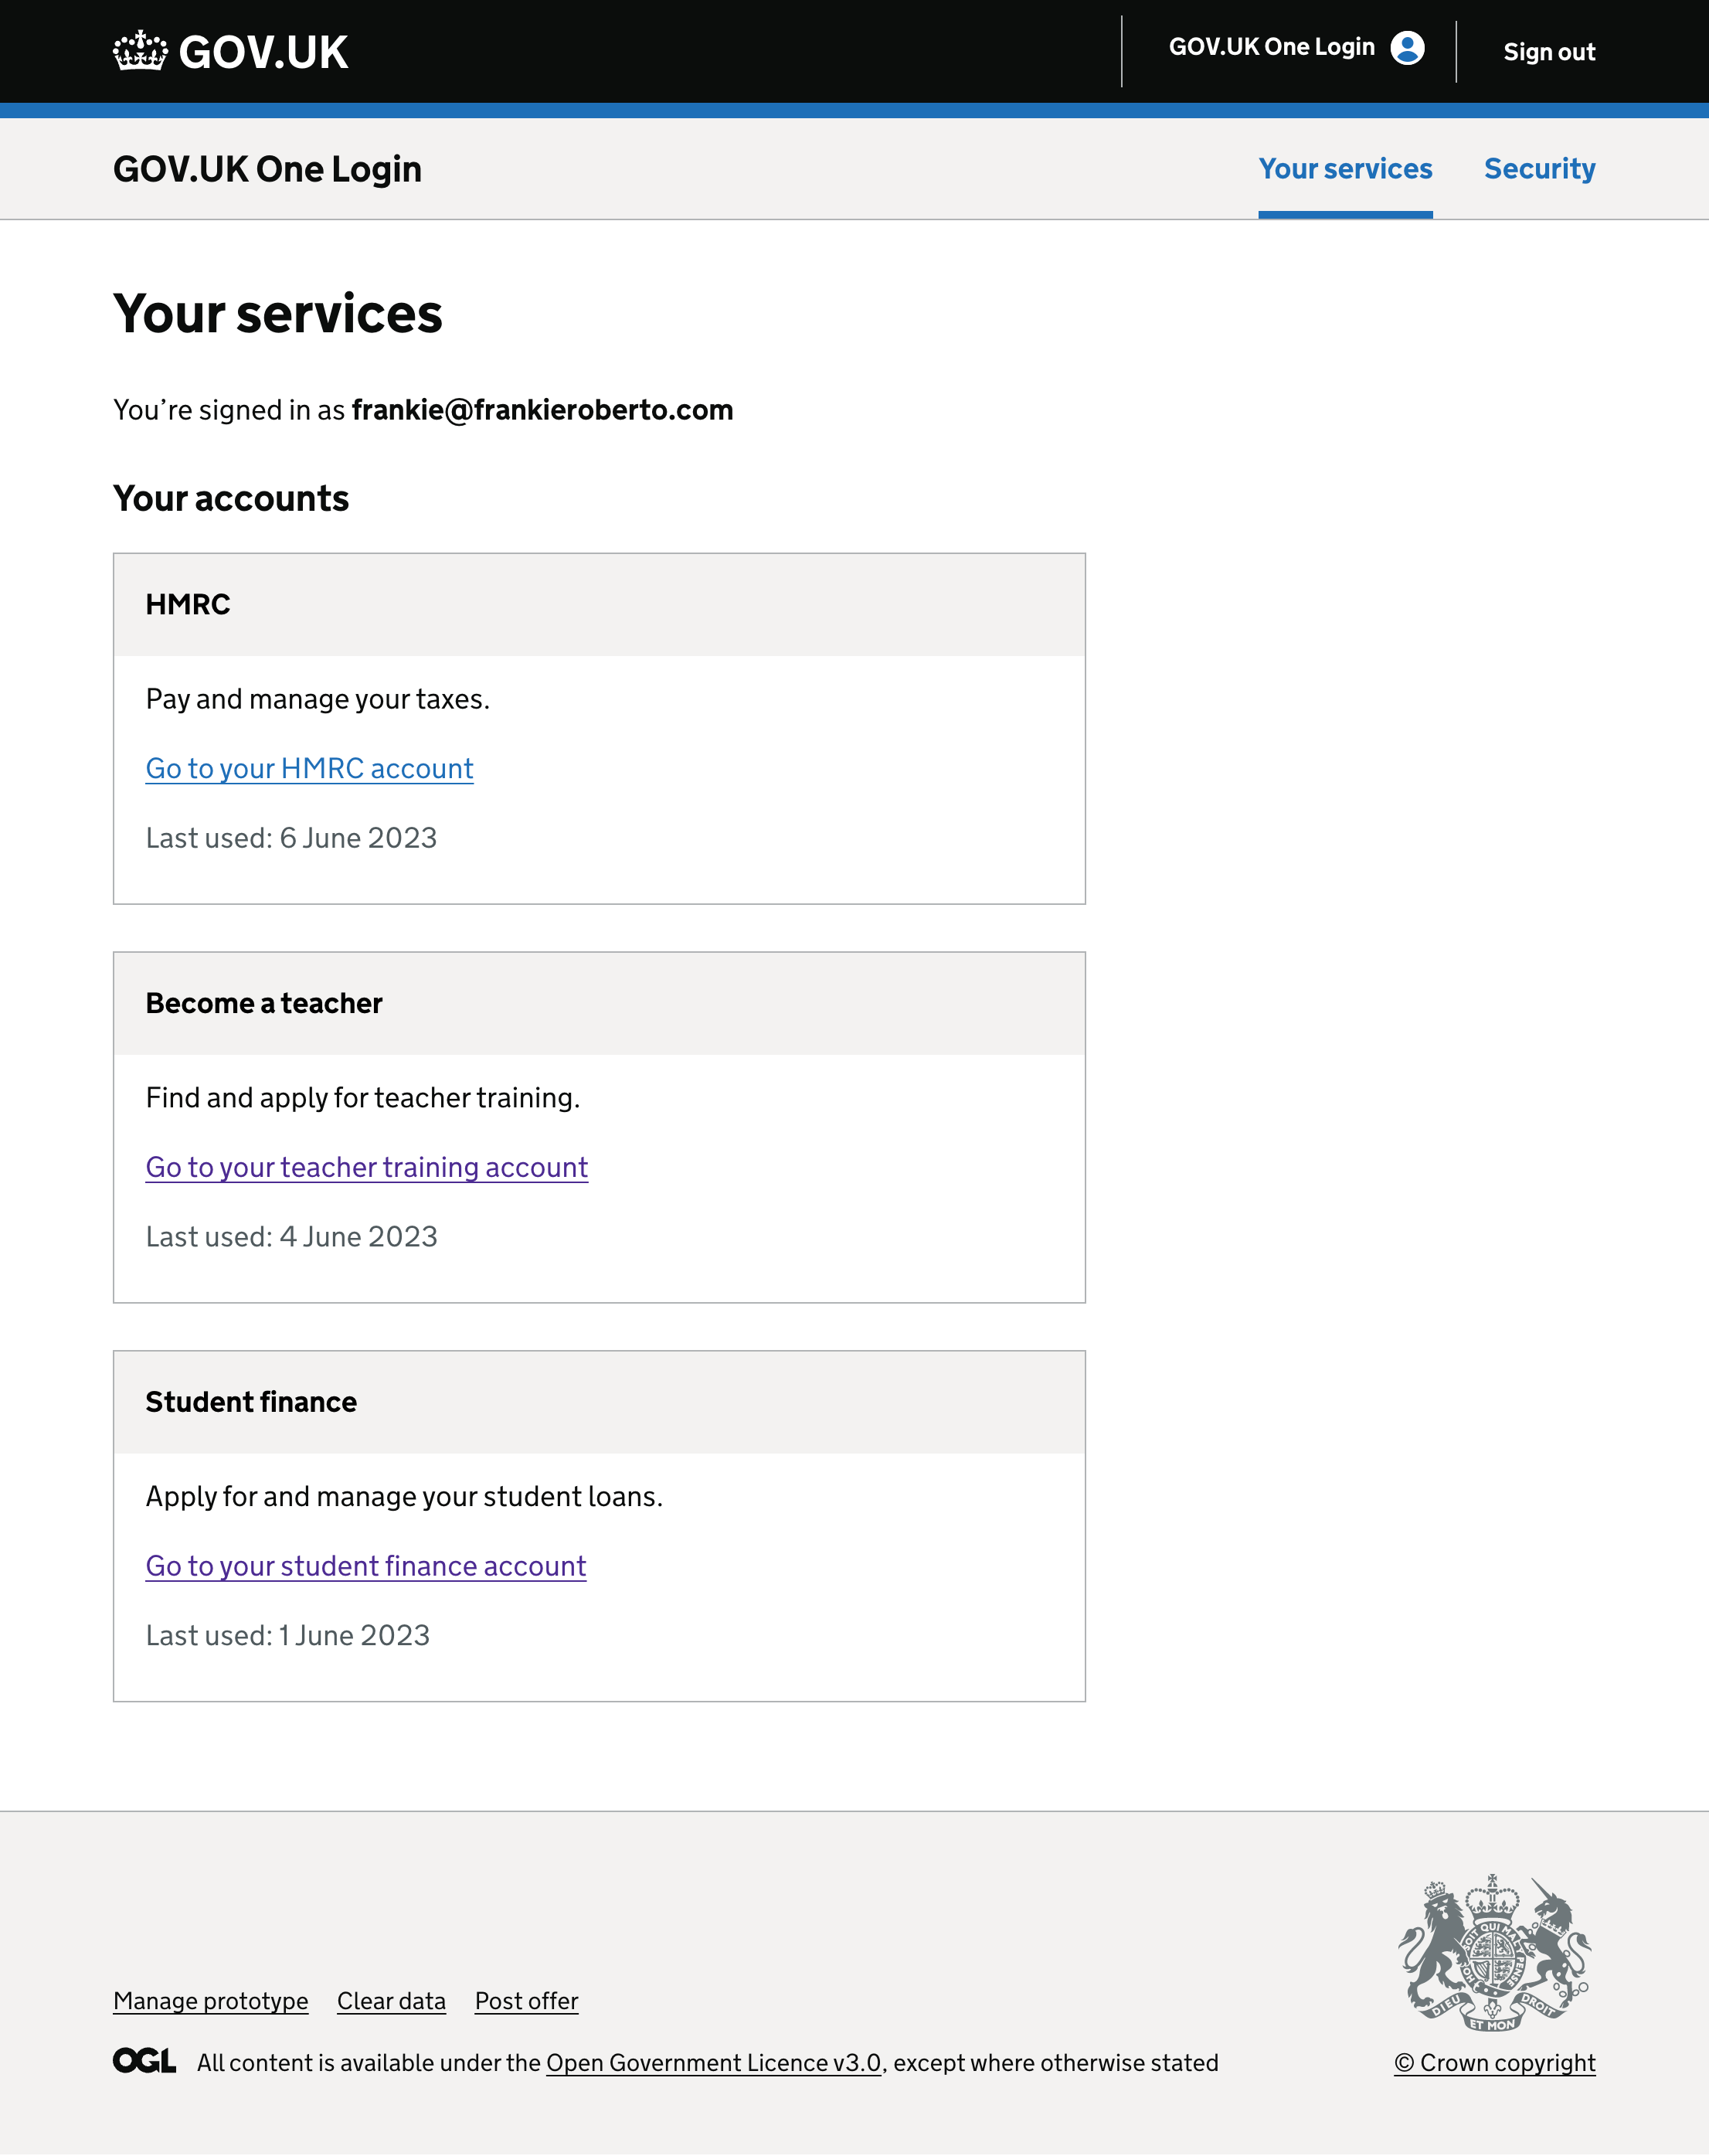 Screenshot showing a list of services on the One Login service